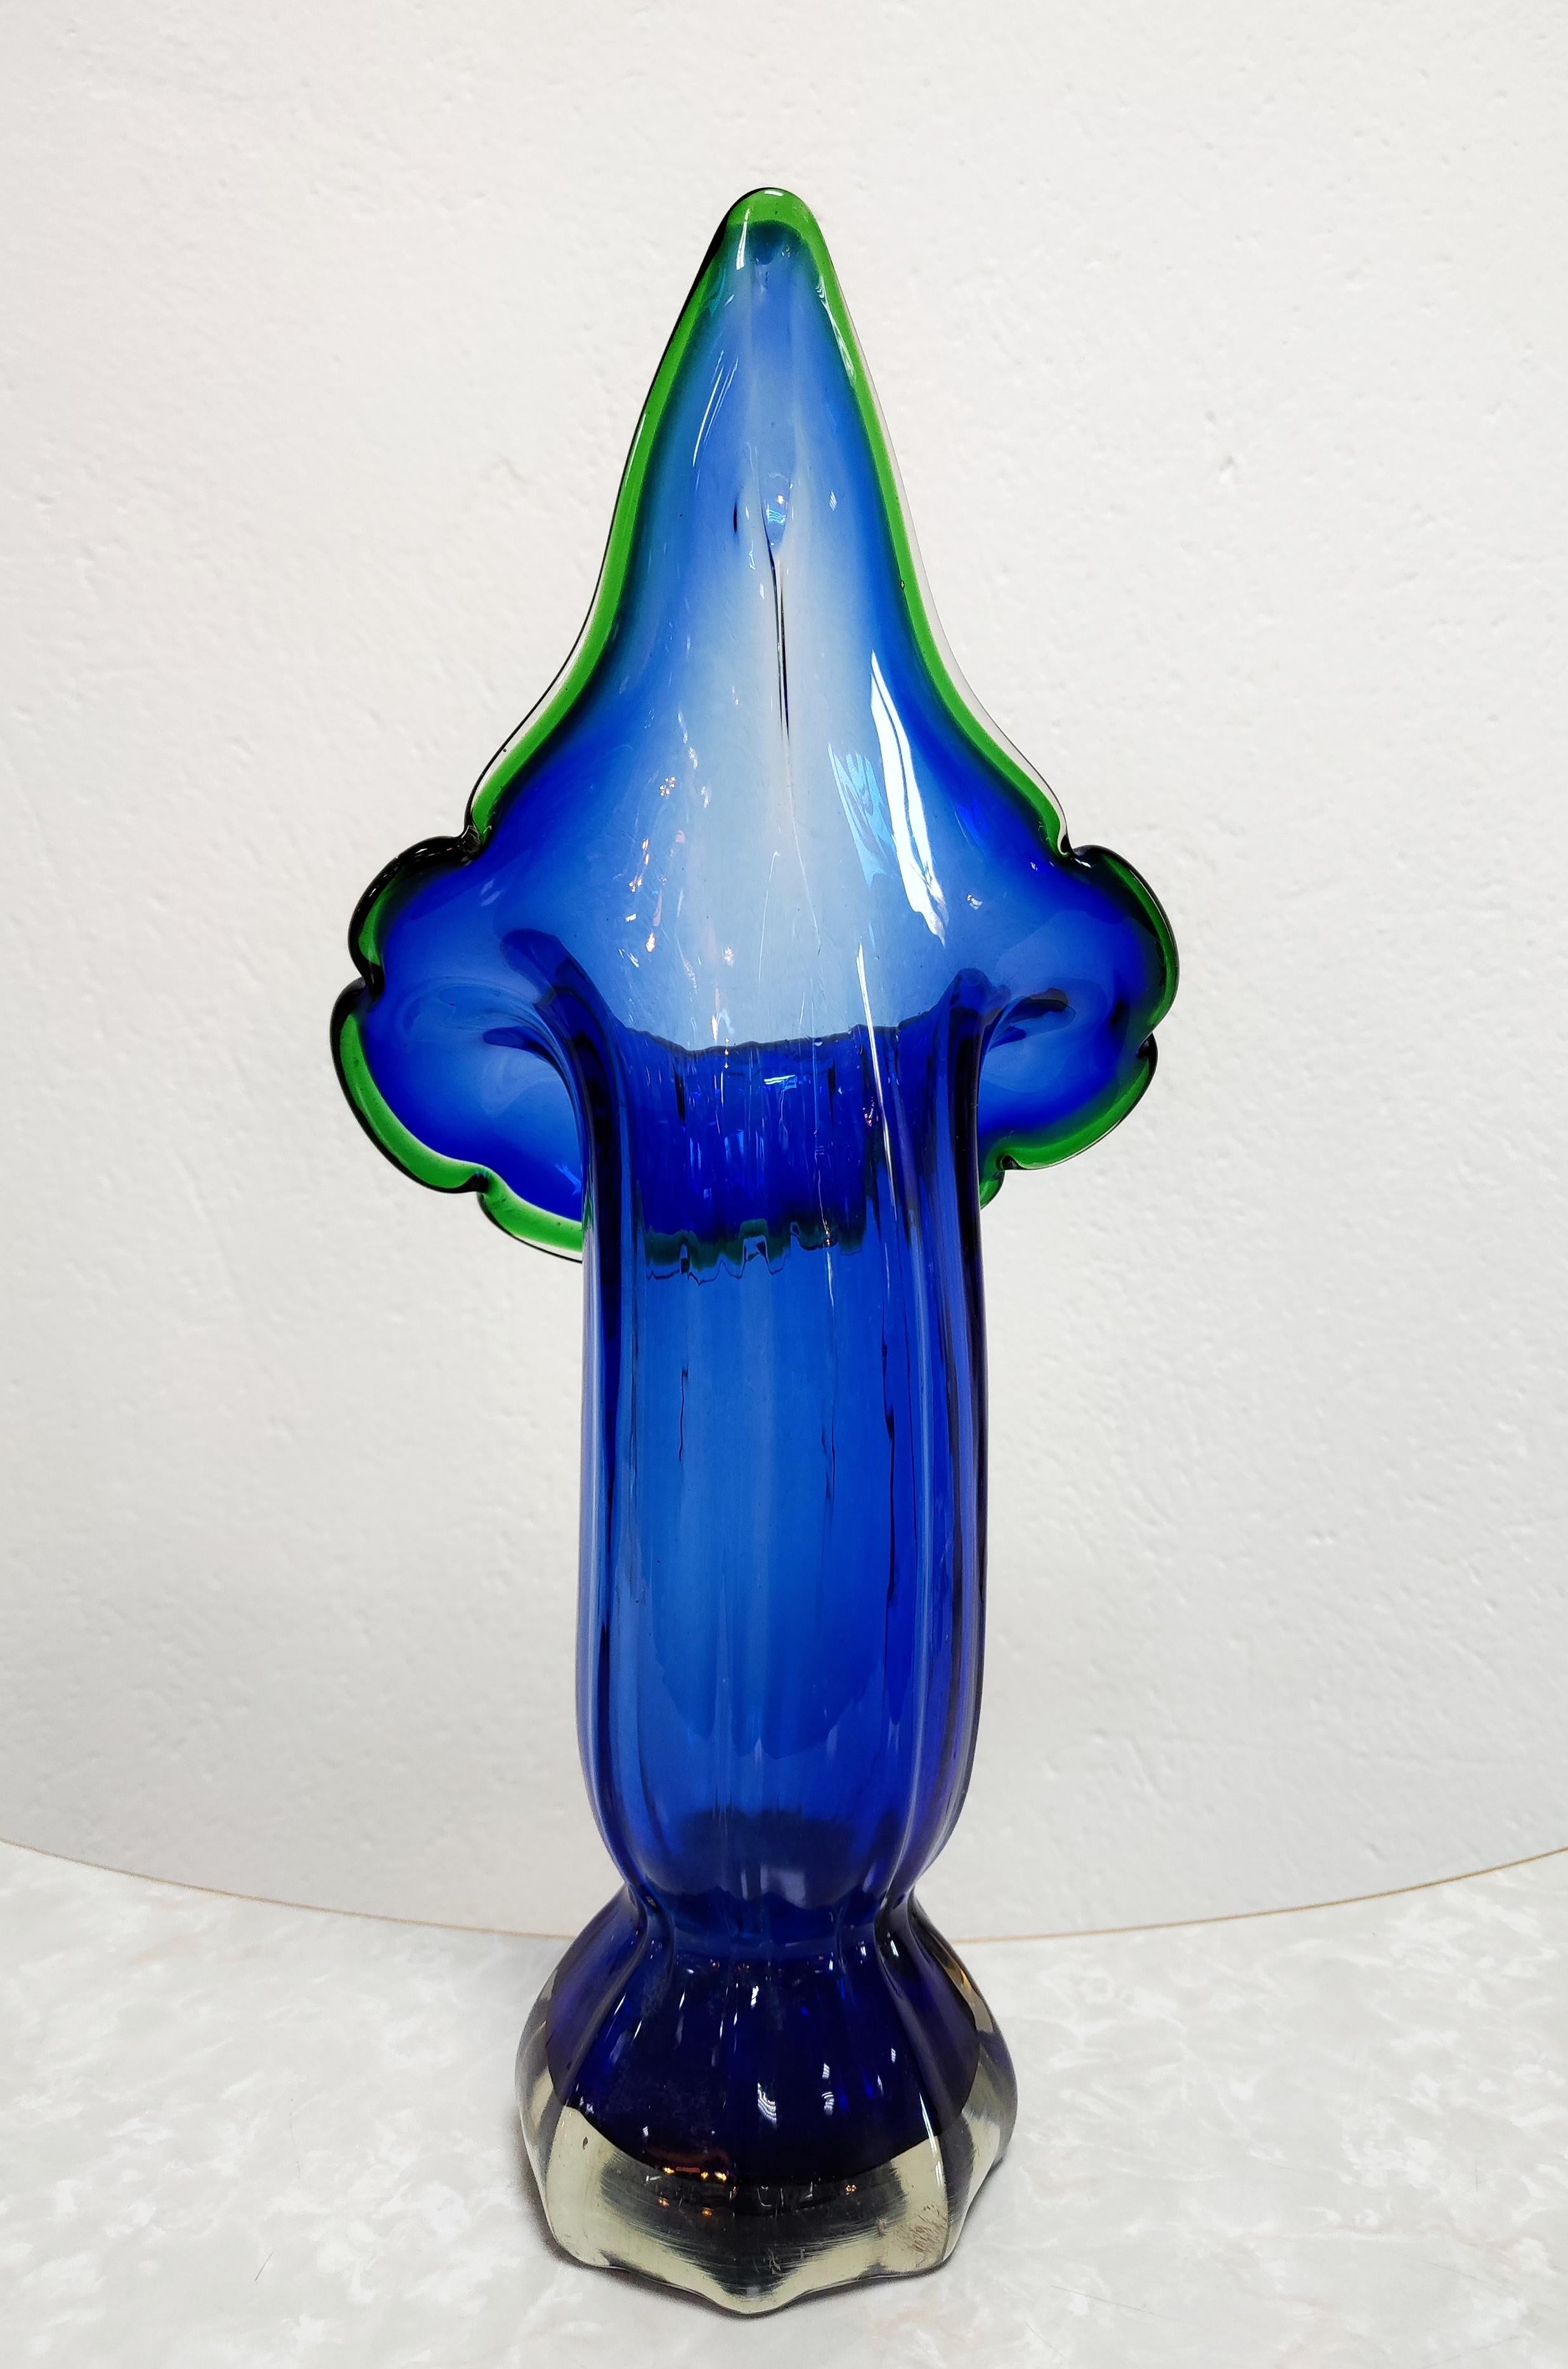 Mid-20th Century Blue Mid-Century Modern Murano Glass Vase Shaped as Calla Lily, Italy, 1960s For Sale